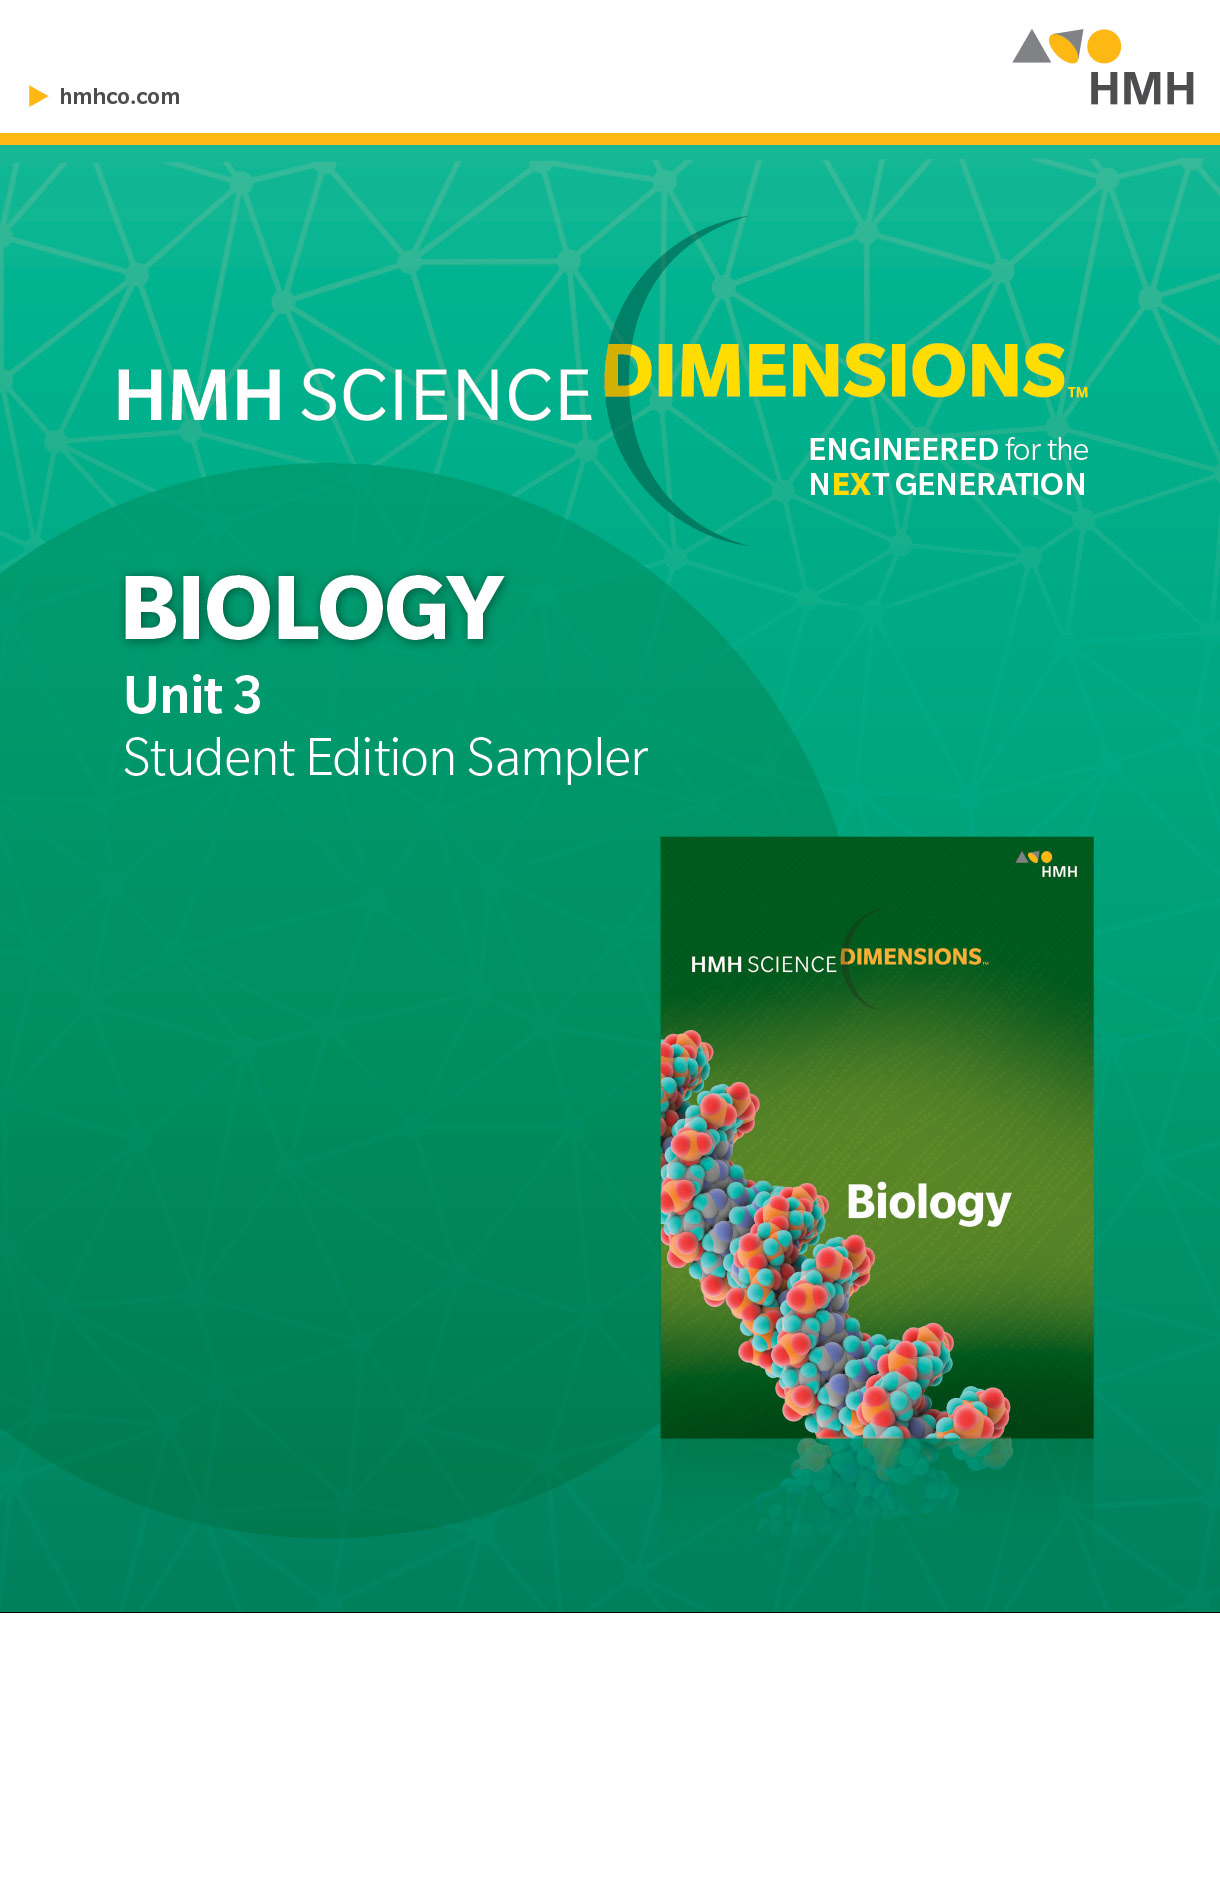 Book cover Dimensions Science Biology Unit 3 Student Edition Sampler. It has a DNA chain.